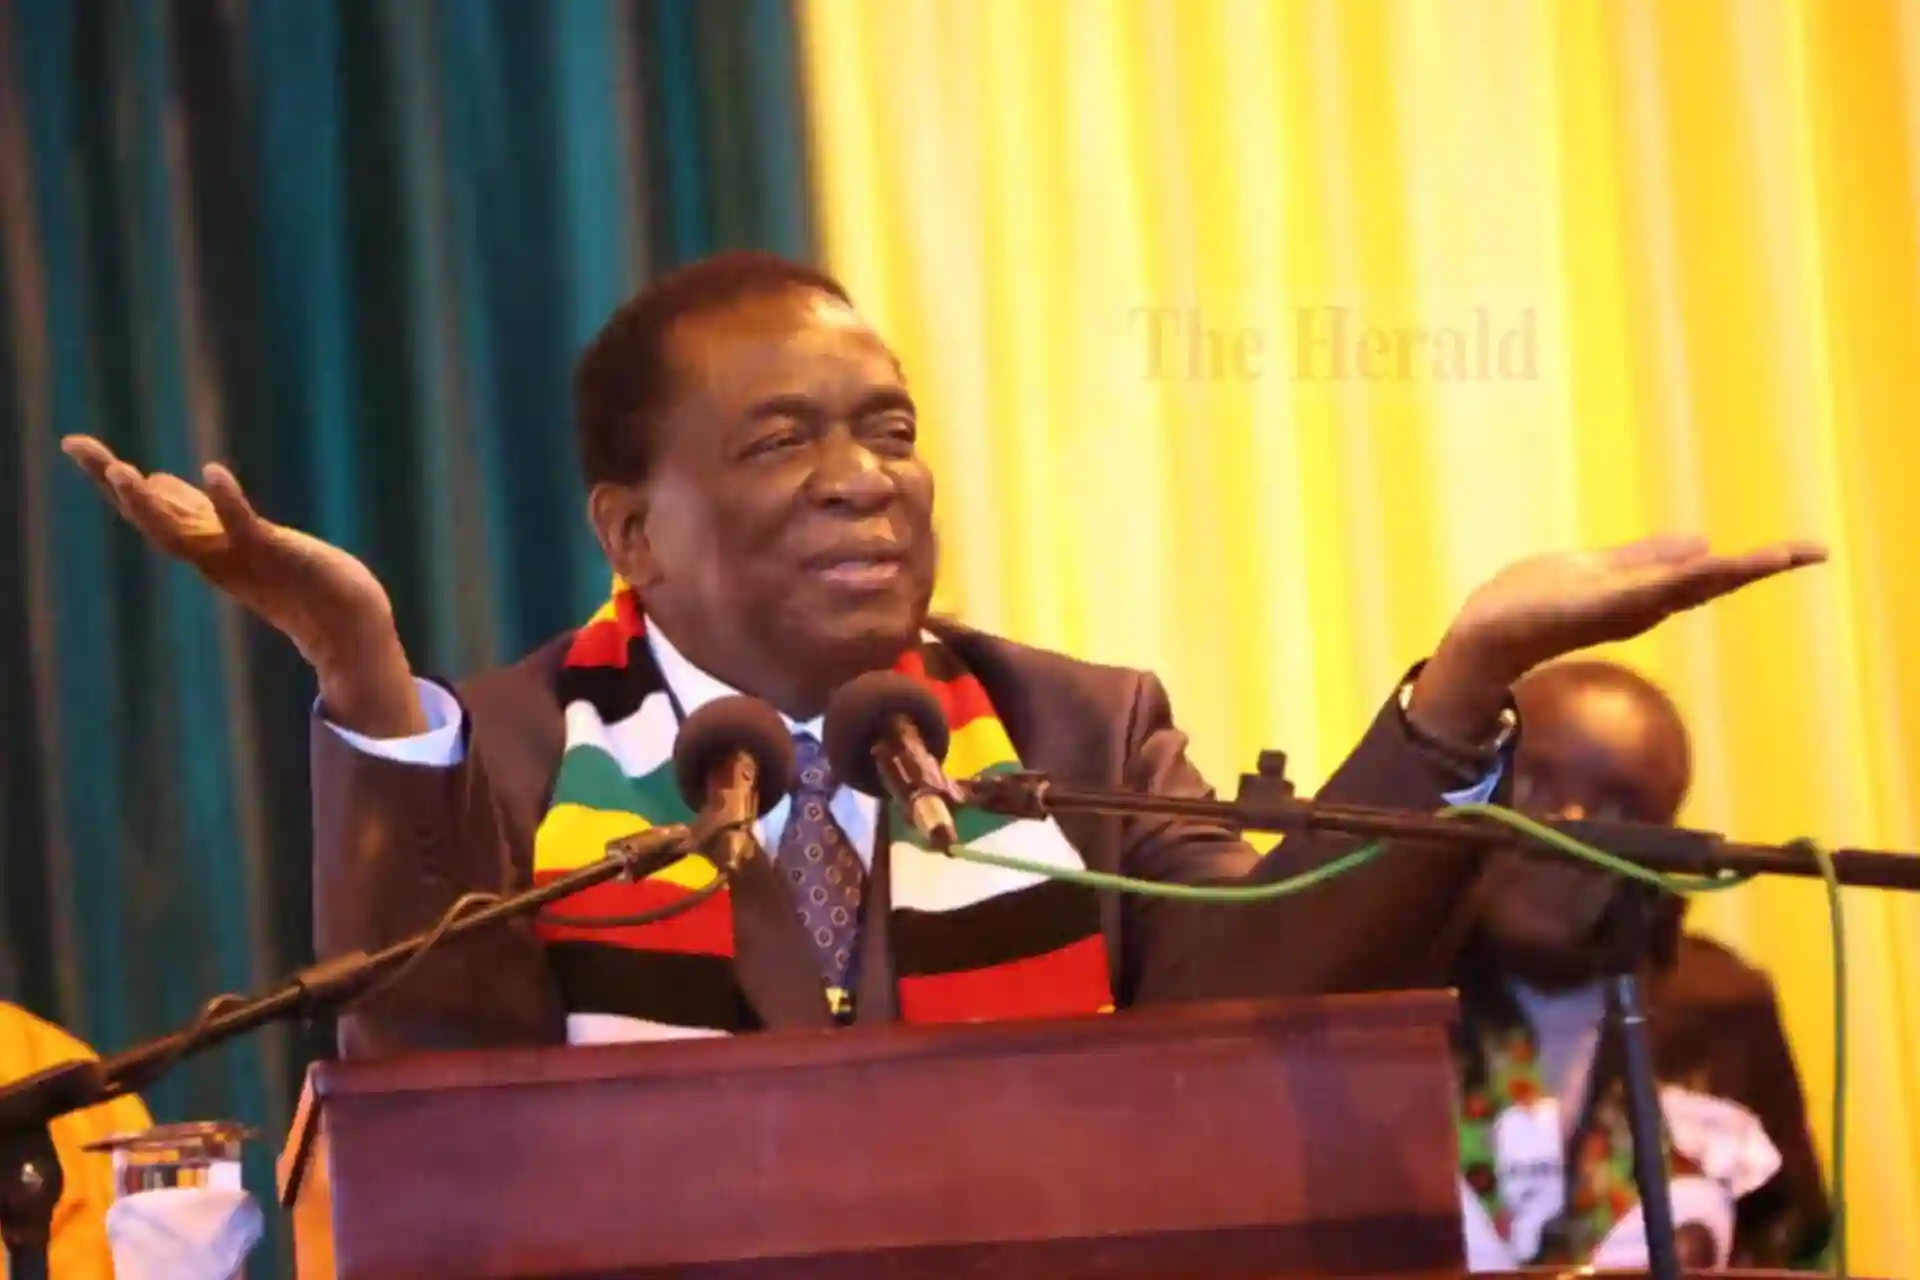 I Did Not Run This Election, I Was A Participant, Says Mnangagwa